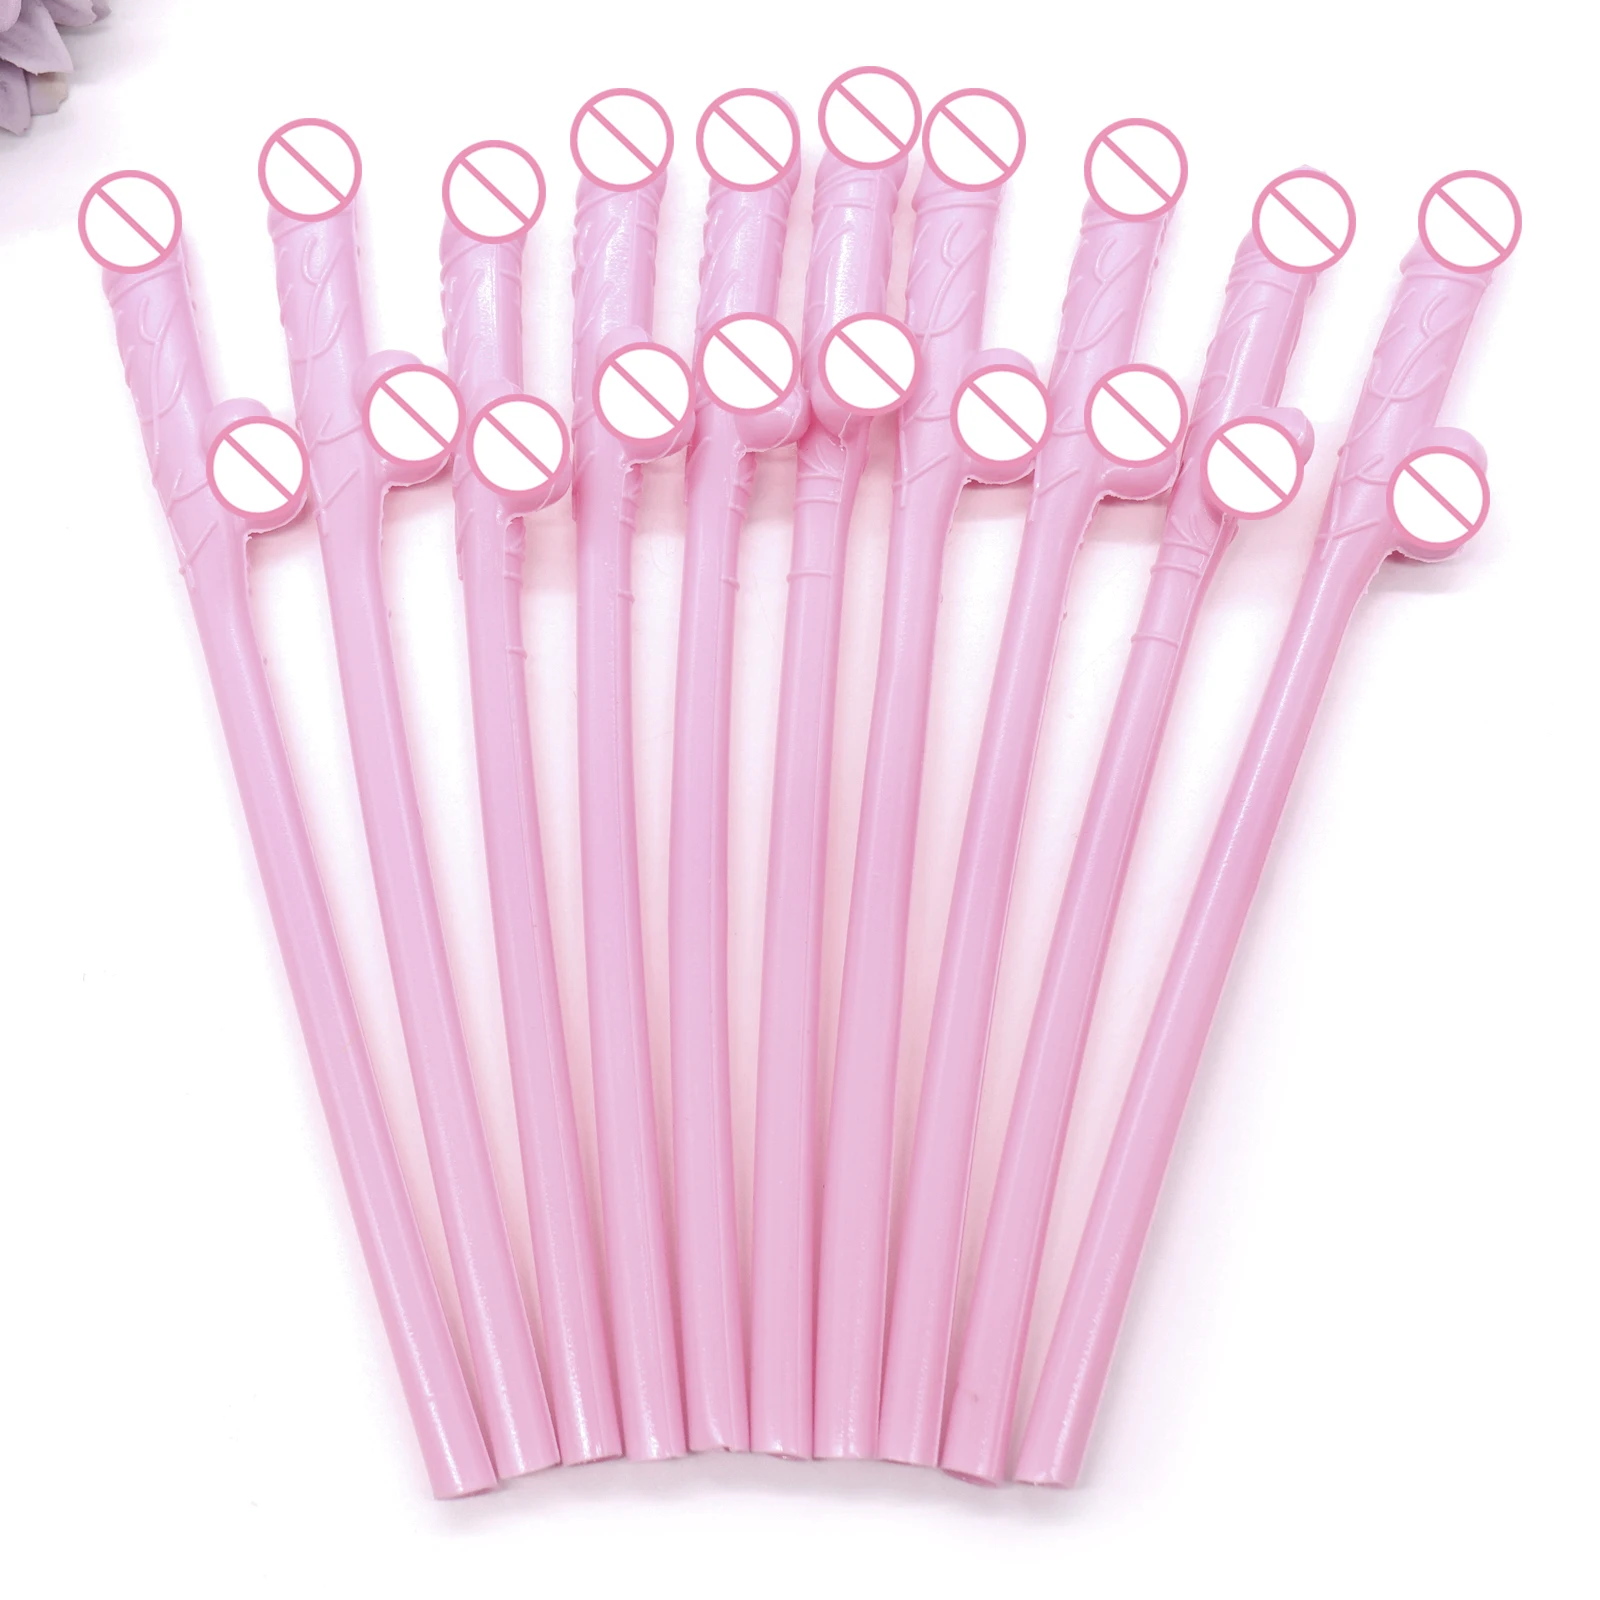 10 Pcs Drinking Penis Straws Bridal Shower Sexy Hen Night Willy Penis